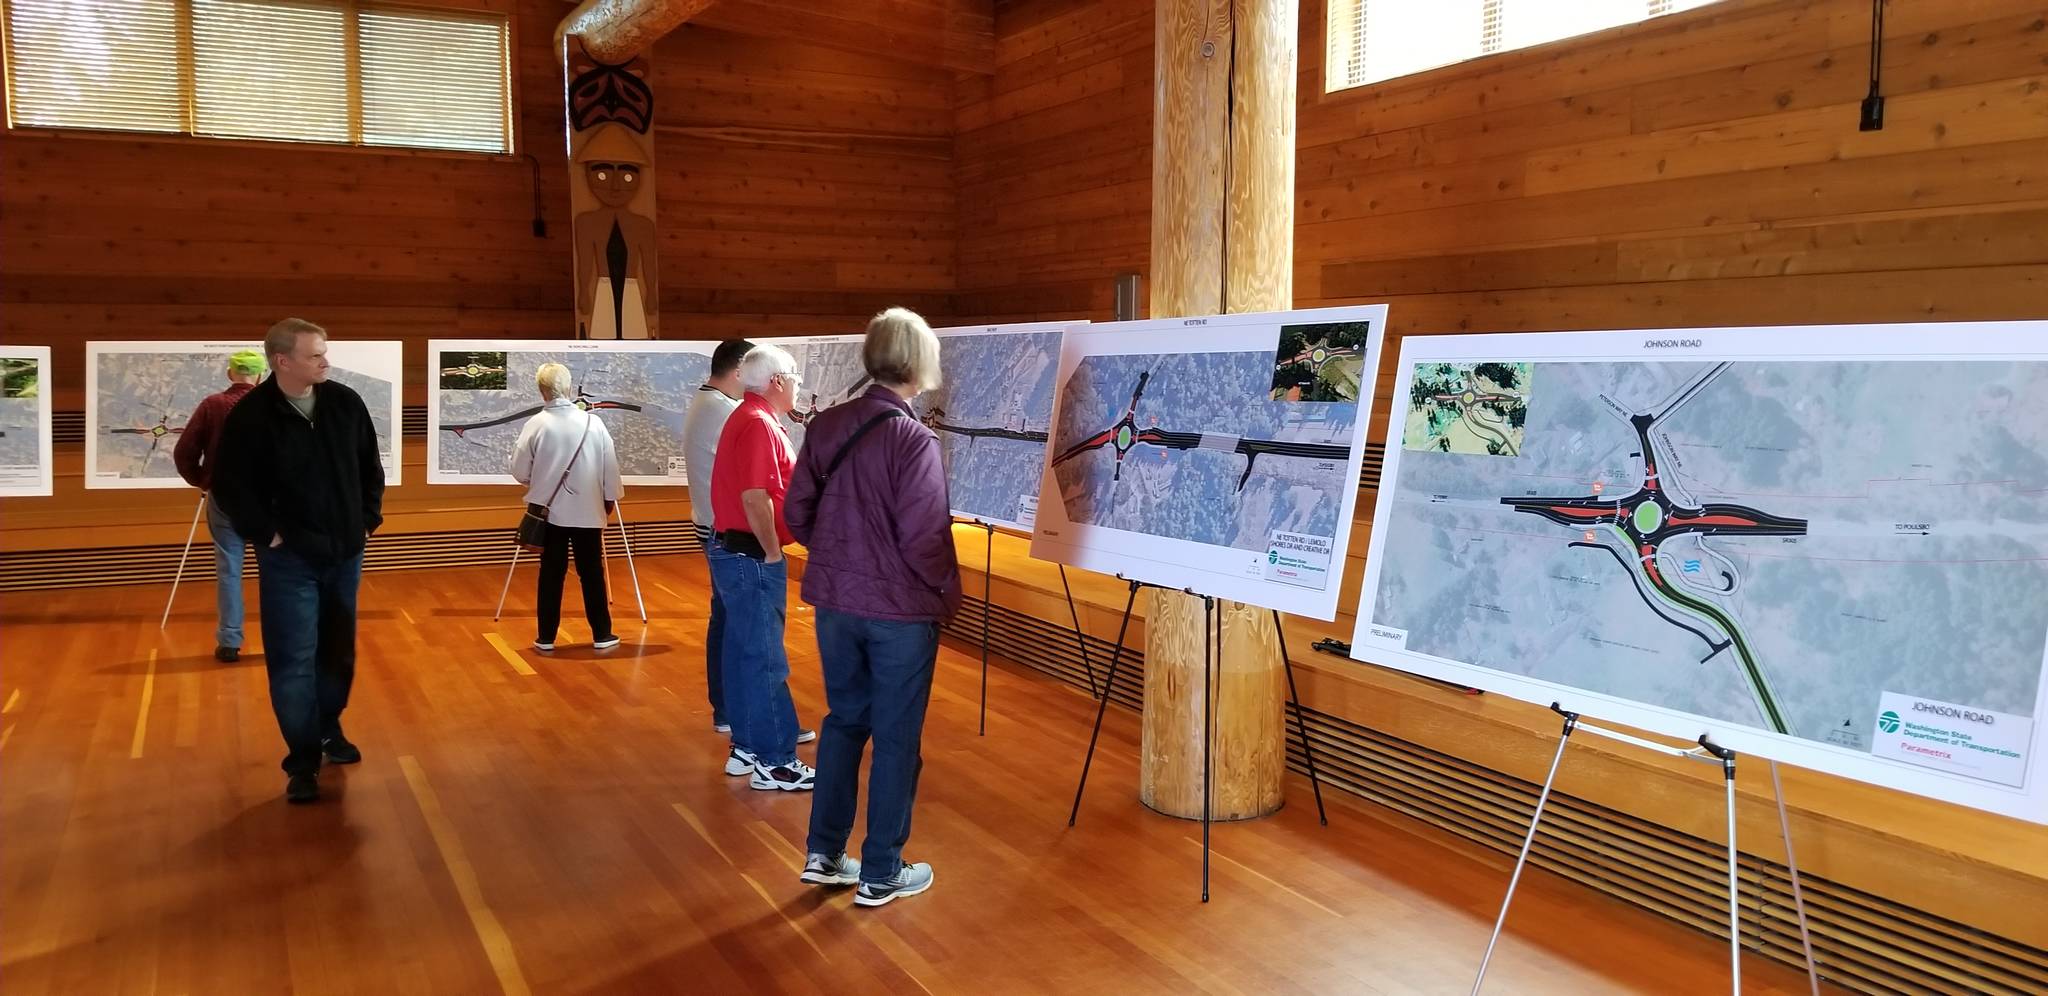 Officials with the Washington State Department of Transportation held an open house in Suquamish Tuesday to discuss plans to construct a series of traffic improvements on the Highway 305 corridor. (Nick Twietmeyer |Kitsap News Group)